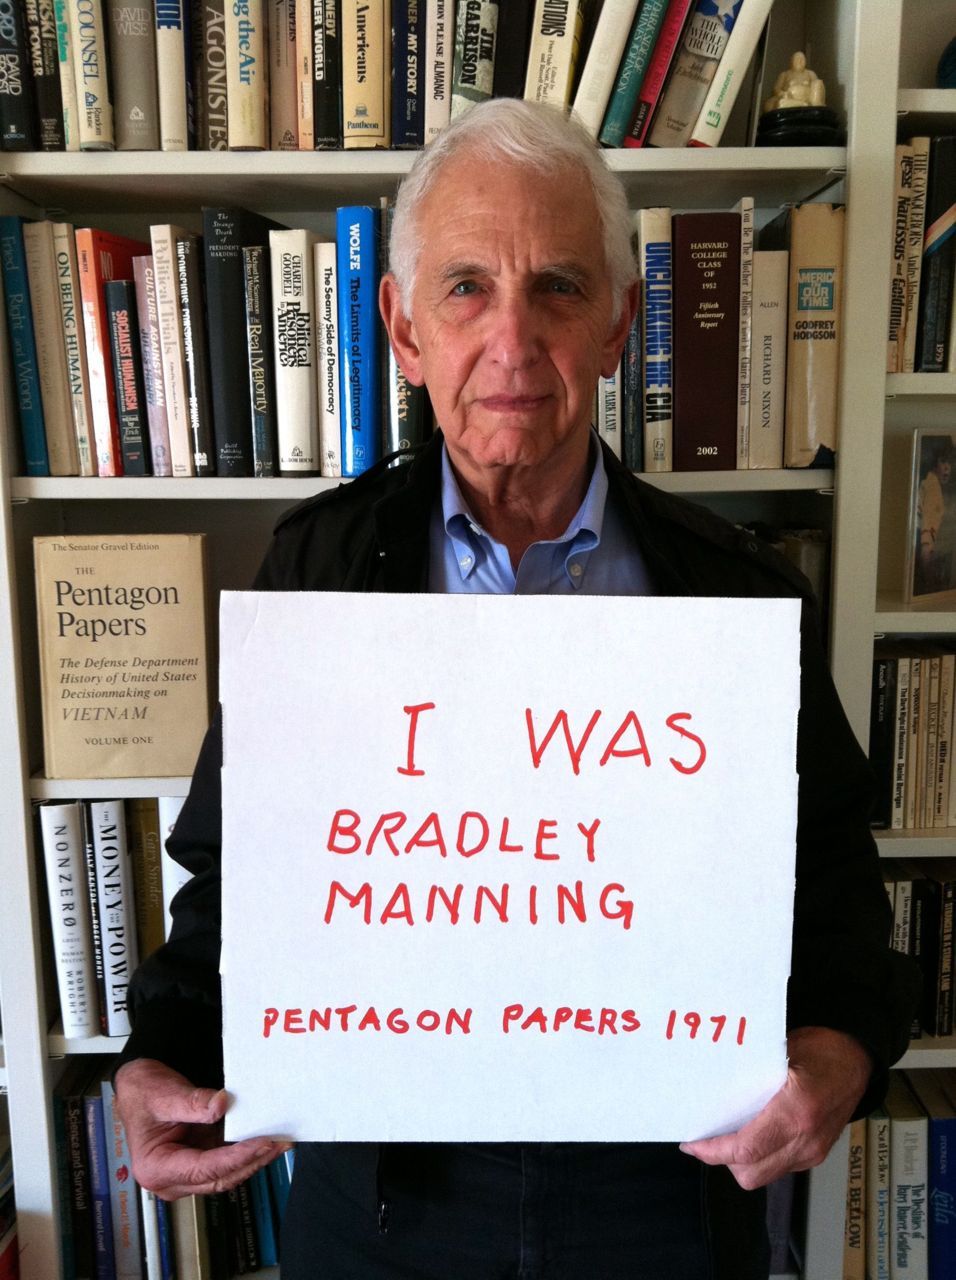 Daniel Ellsberg
I was the Bradley Manning of my day. In 1971 I too faced life (115 years) in prison for exposing classified government lies and crimes. President Obama says “the Ellsberg material was classified on a different basis.” True. The...